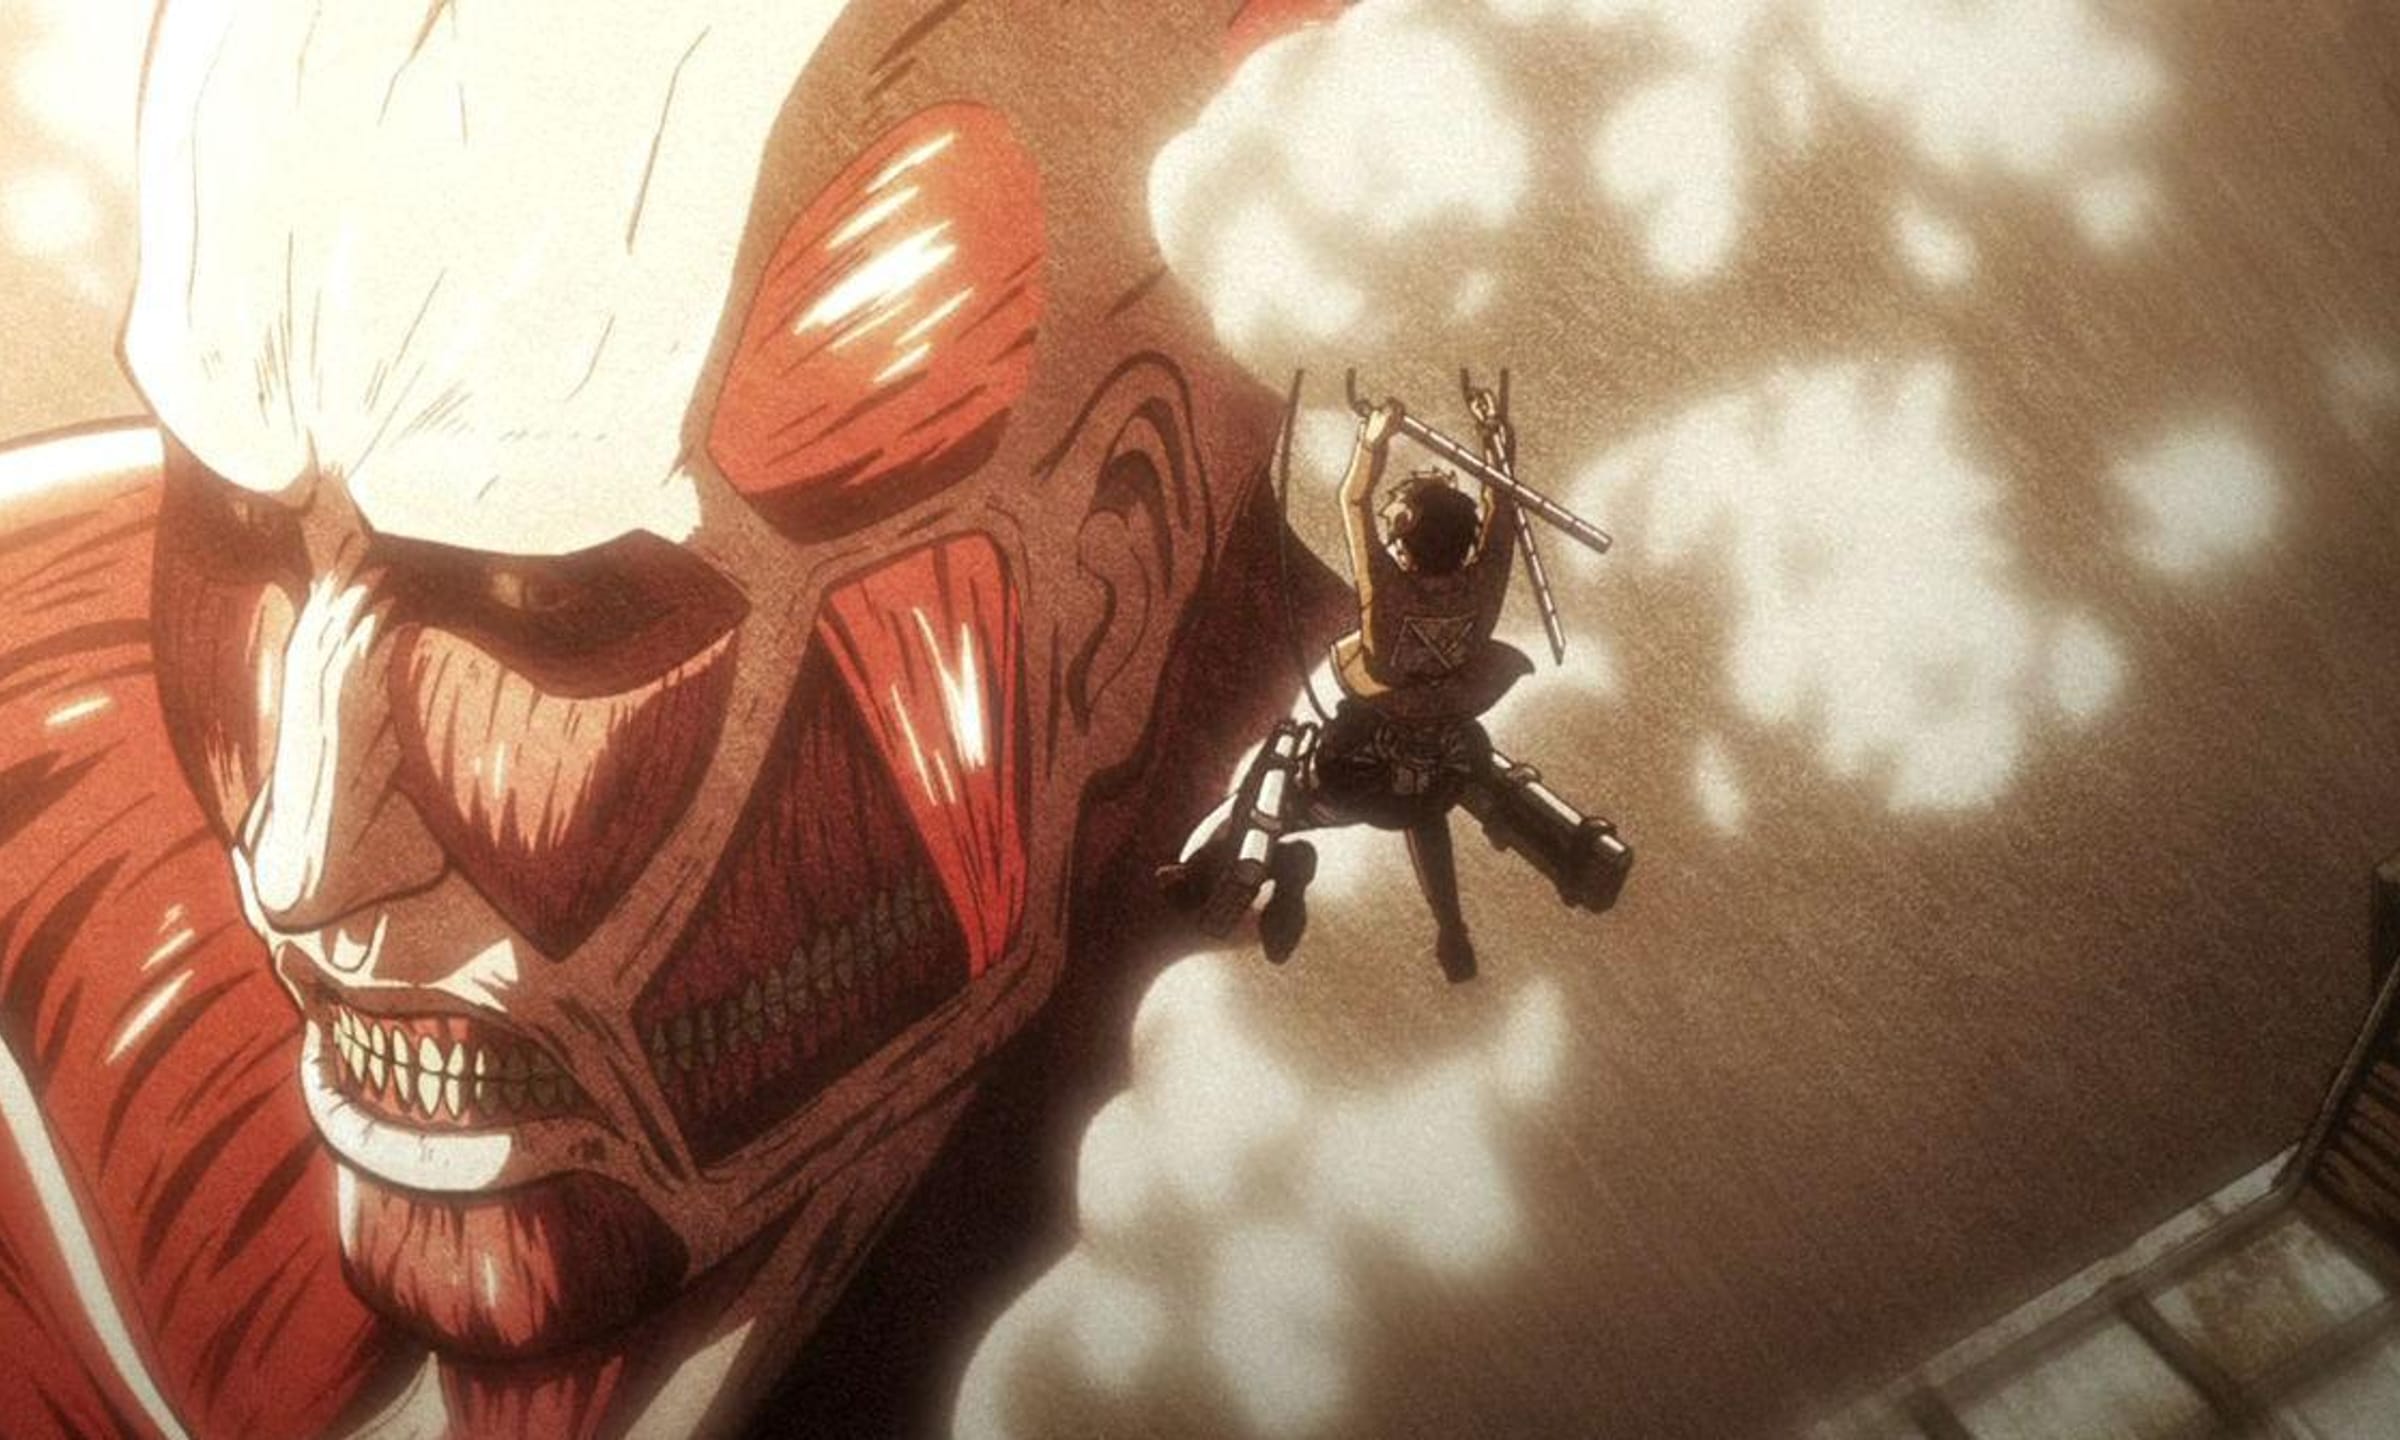 8 anime you should check out if you love Attack on Titan